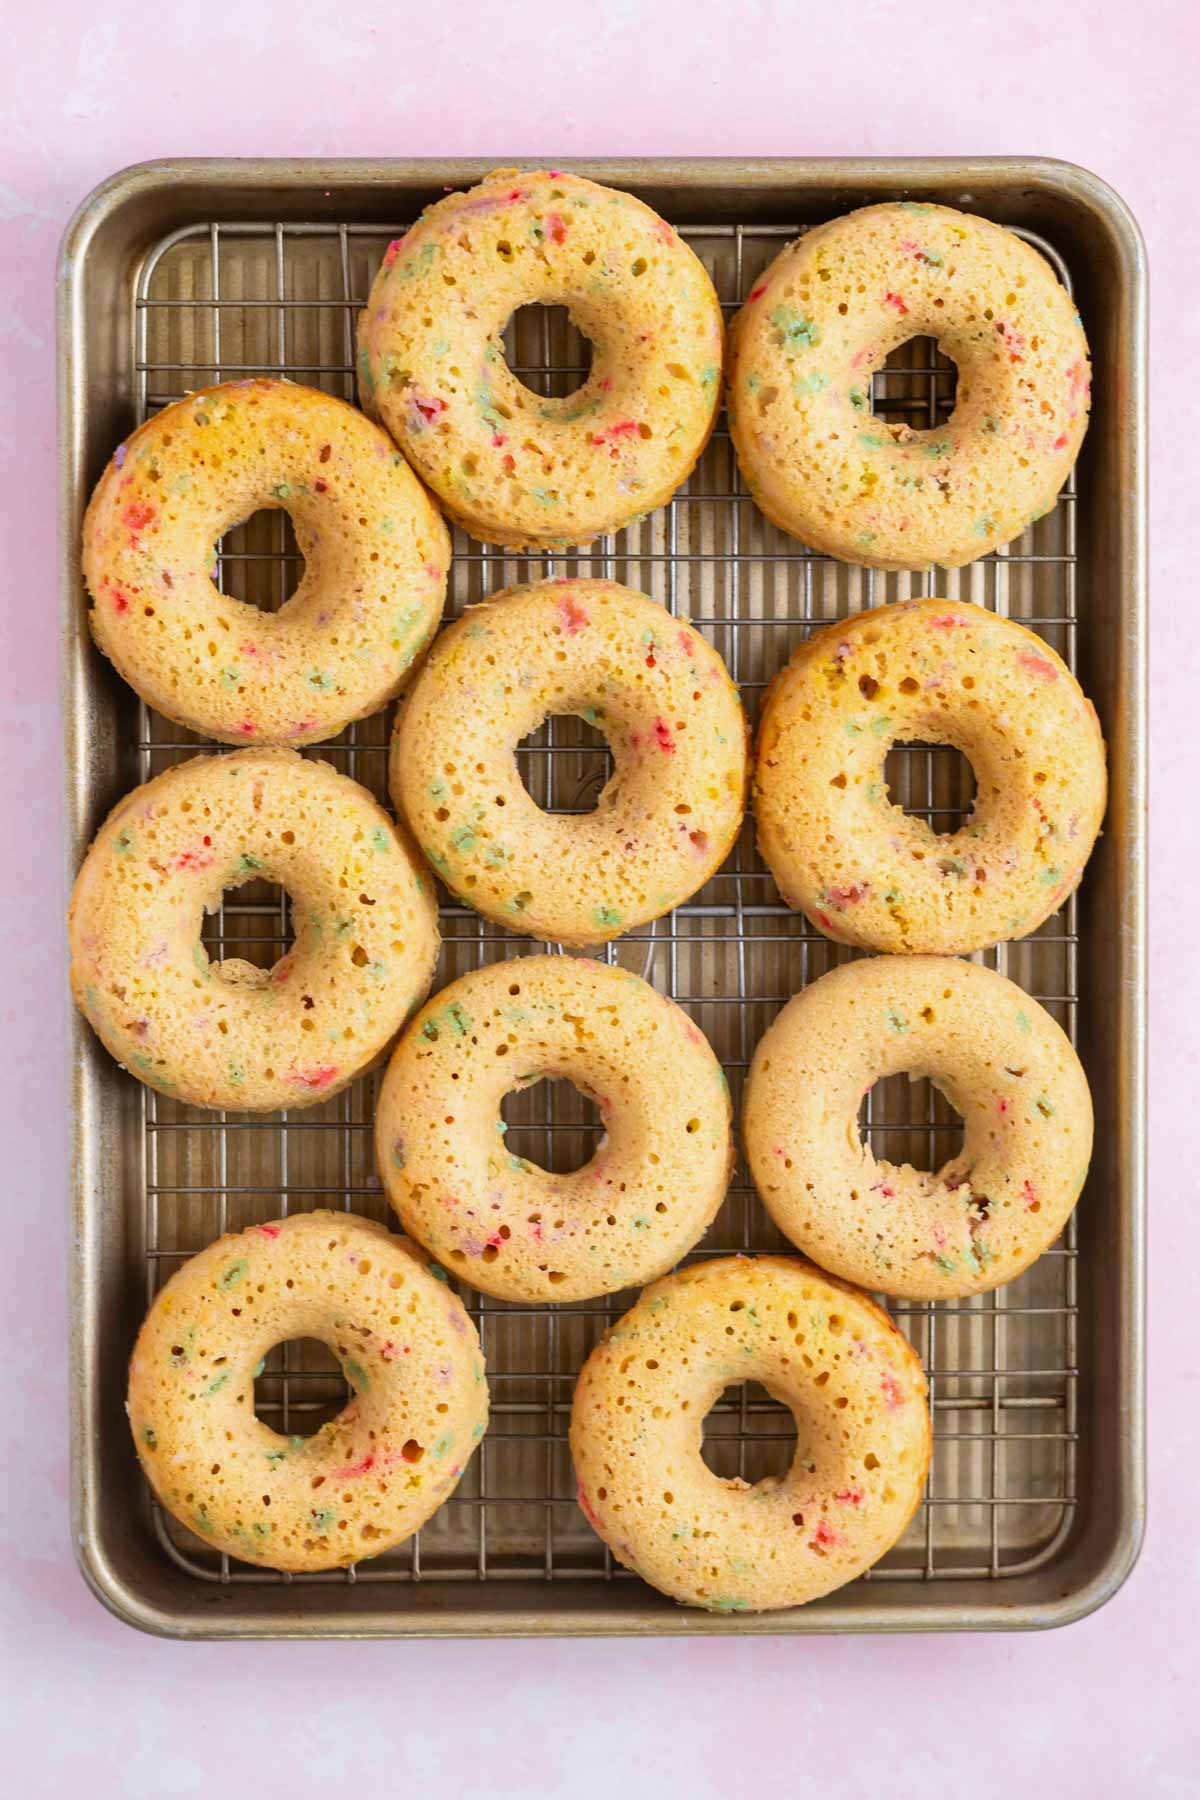 unglazed donuts on a cooling rack over a baking sheet pan.